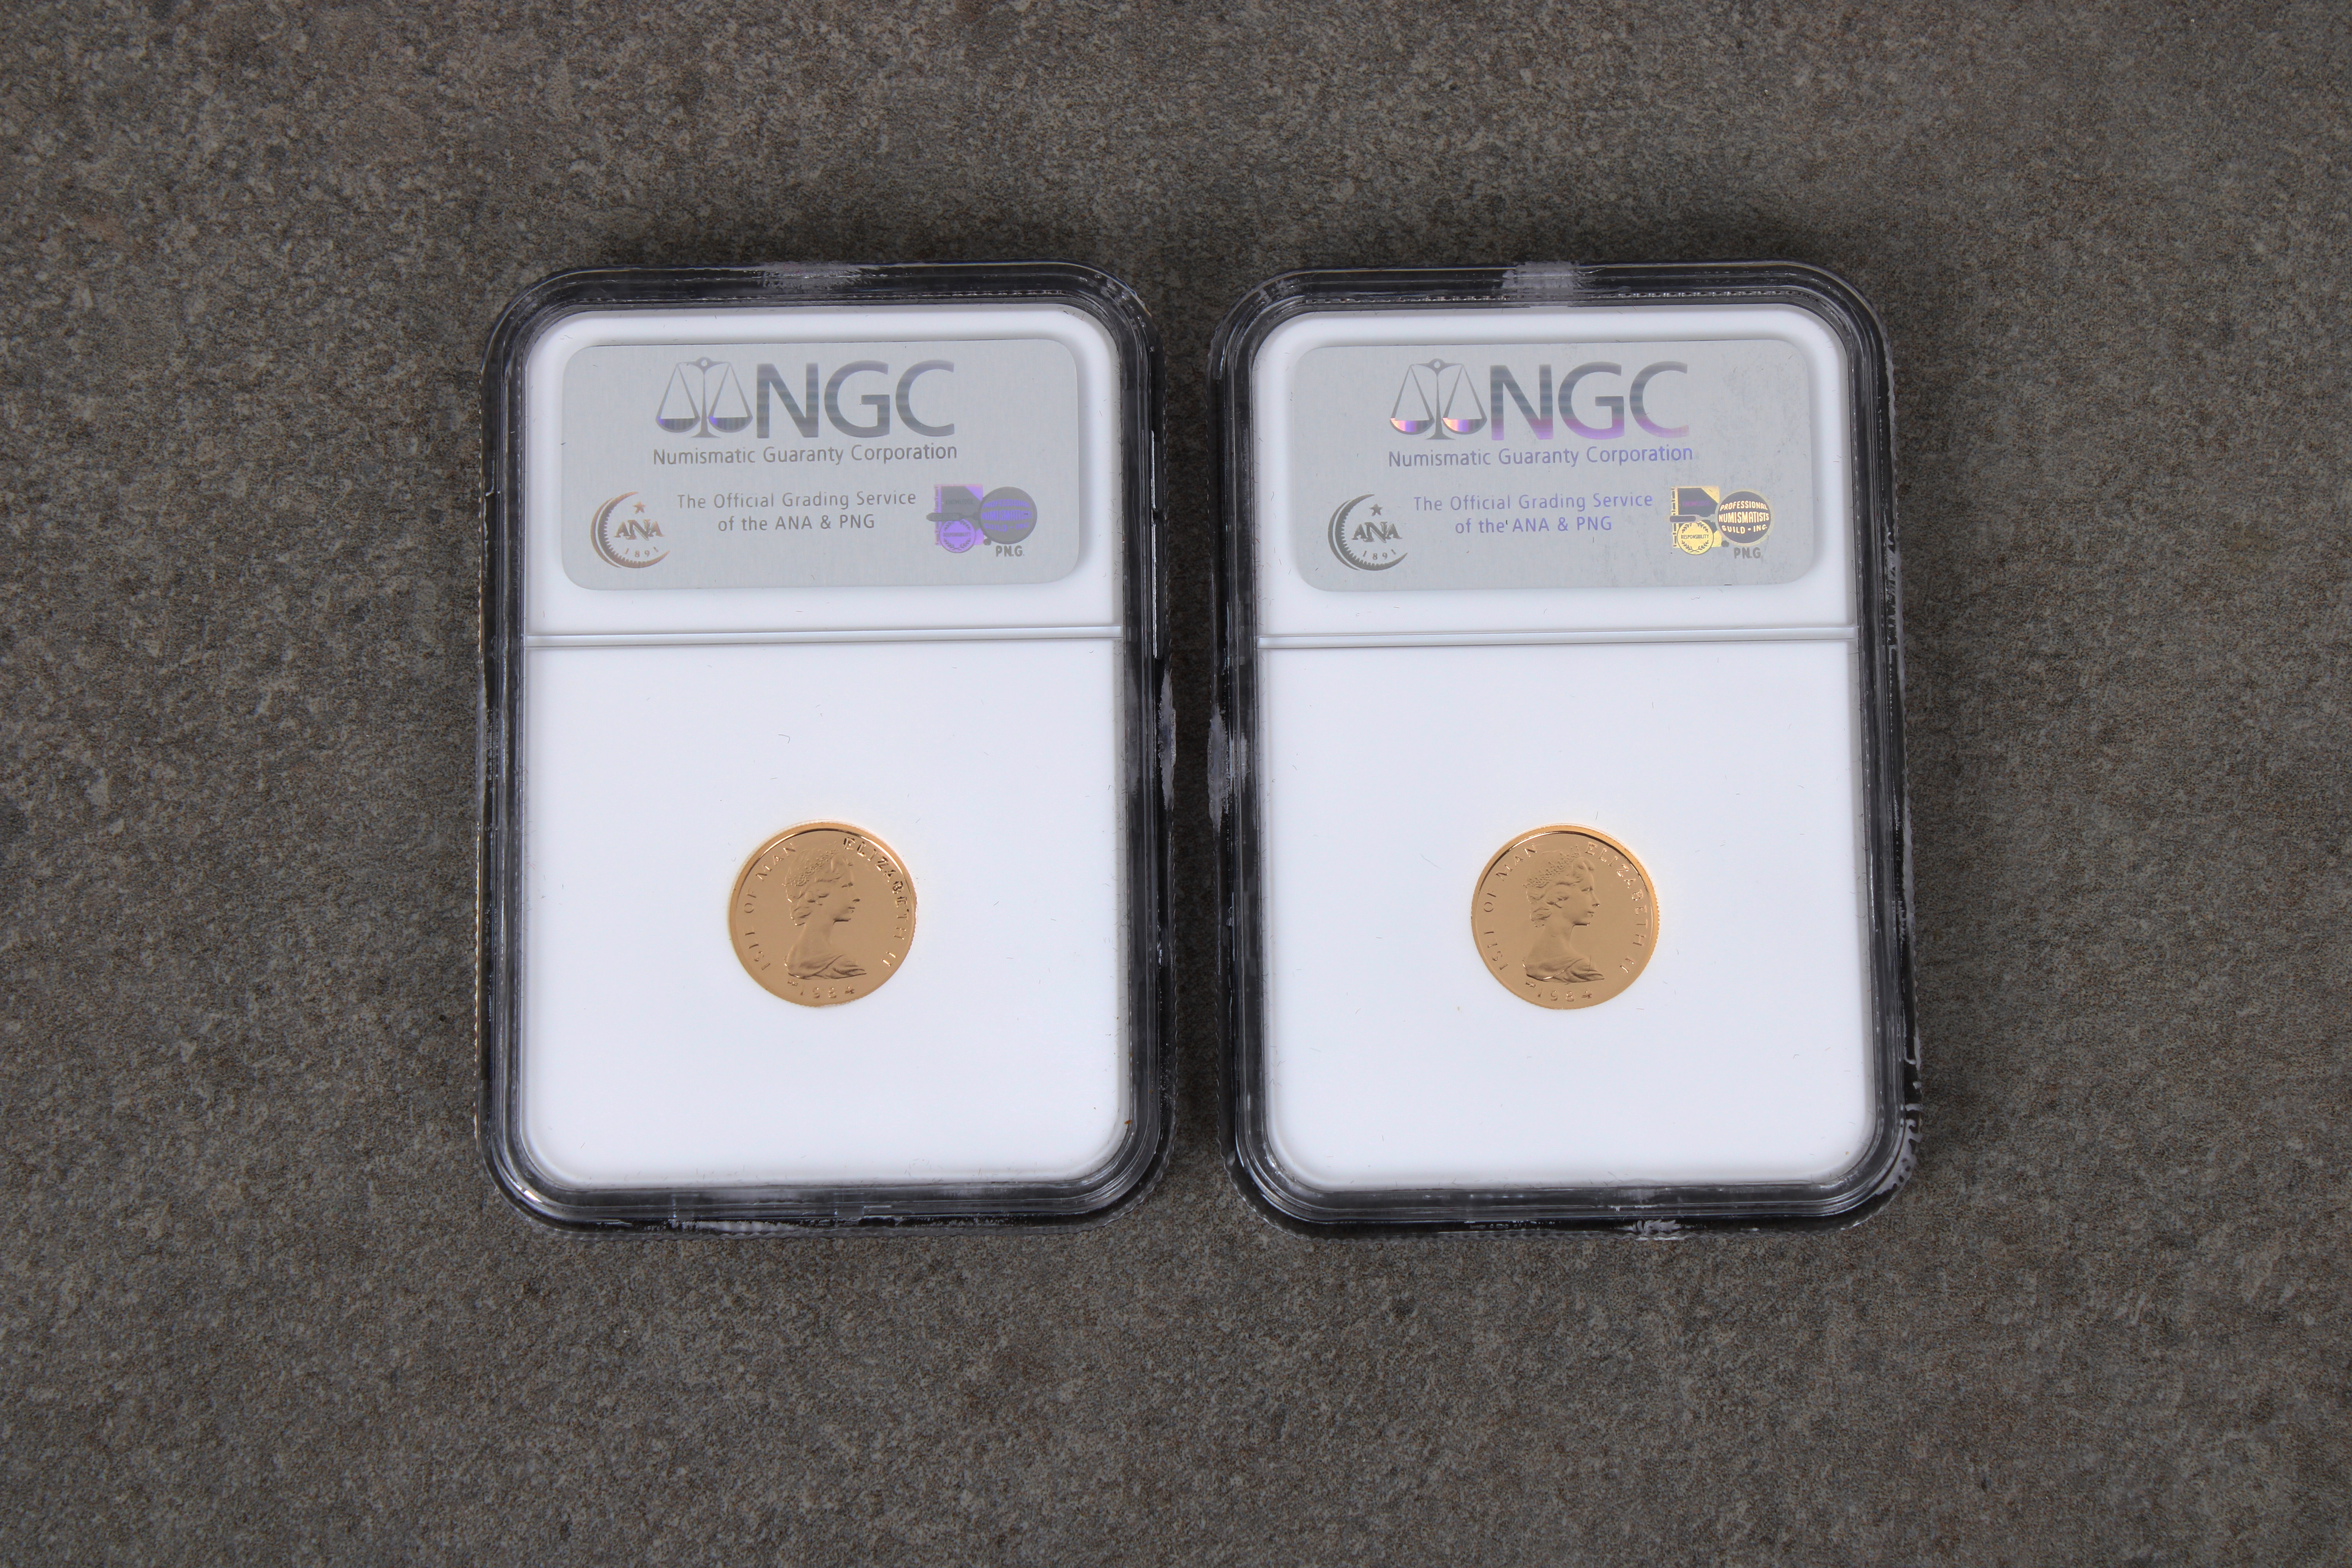 Two x 1984 Isle of Man Gold Tenth Oz (1/10) Angel coin - NGC graded - Image 2 of 2